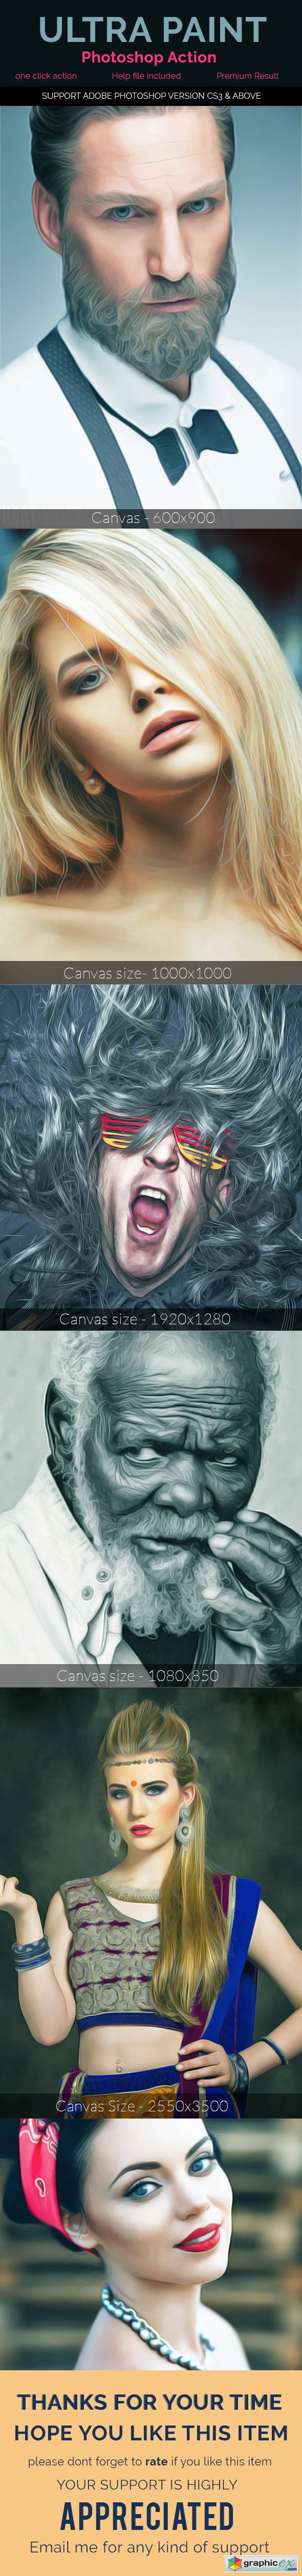 GraphicRiver - Mix Art Action 20423338 Download Free